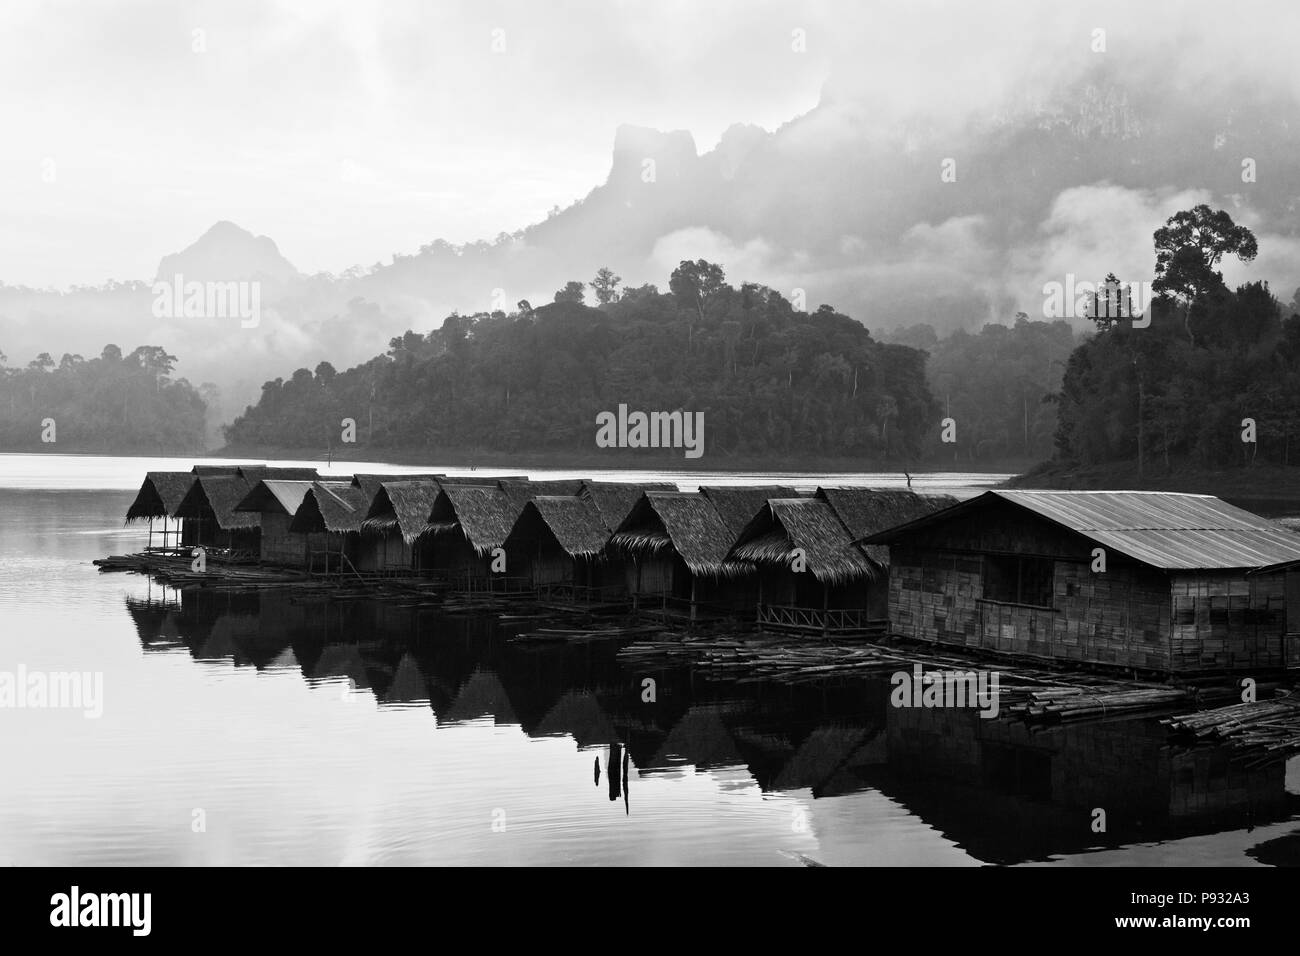 Dawn as seen from CHIEW LAN RAFT HOUSE on CHEOW EN LAKE in the KHAO SOK NATIONAL PARK - THAILAND Stock Photo